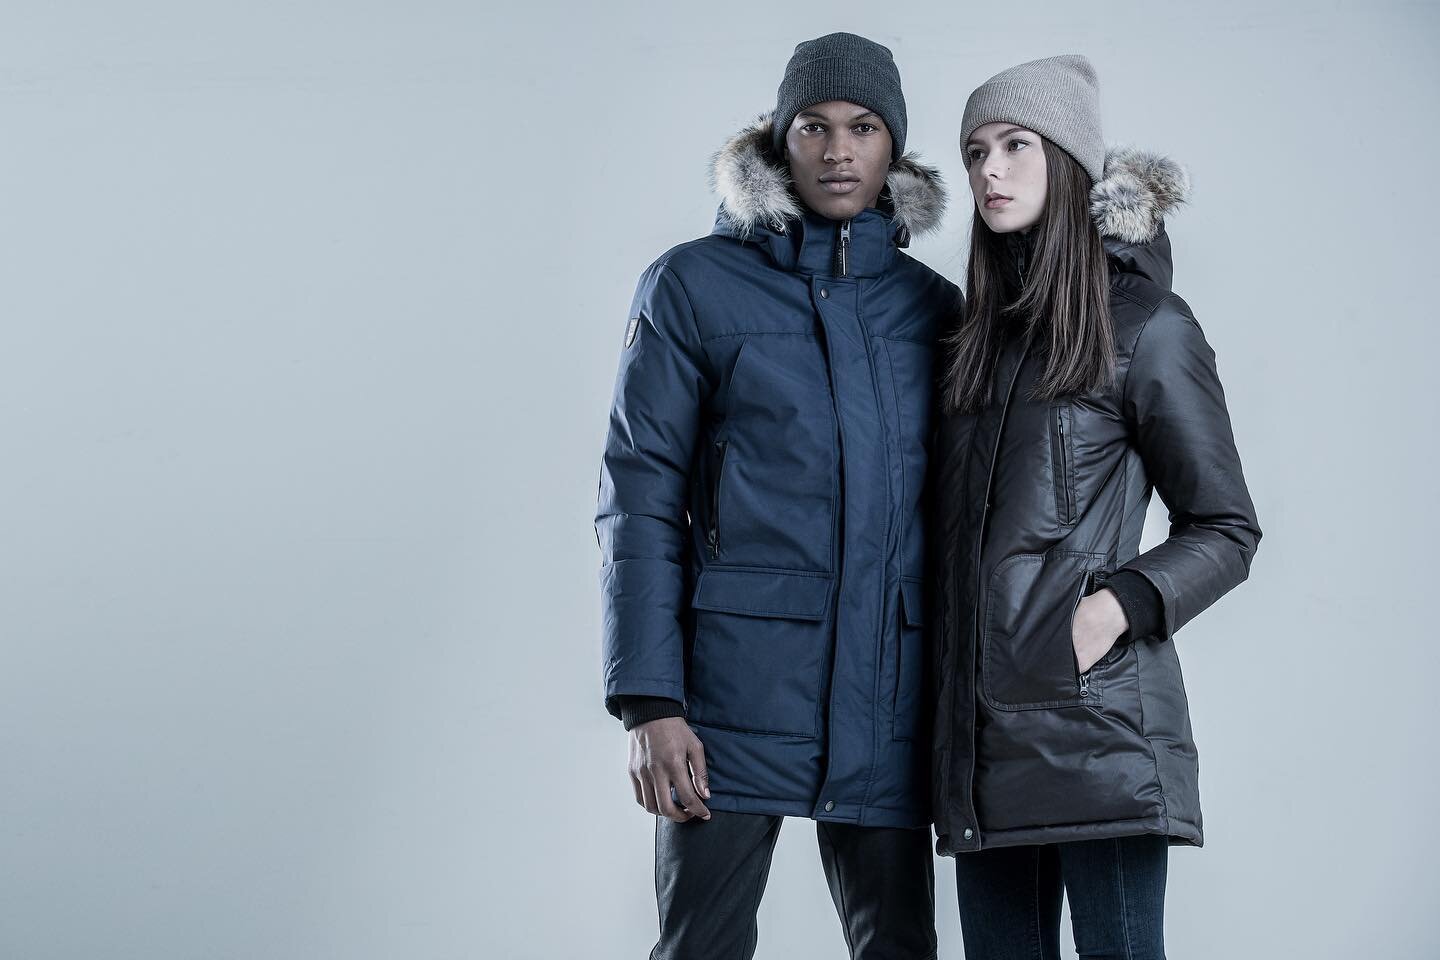 Pairs nicely with out matching. Shown is the St John&rsquo;s parka and a style similar to the Duncan parka with its C22 Chill outer shell waterproof coated fabric.

#oscx #osccross #madeincanada #canadianbrand #winterstyle #cityliving #torontolifesty